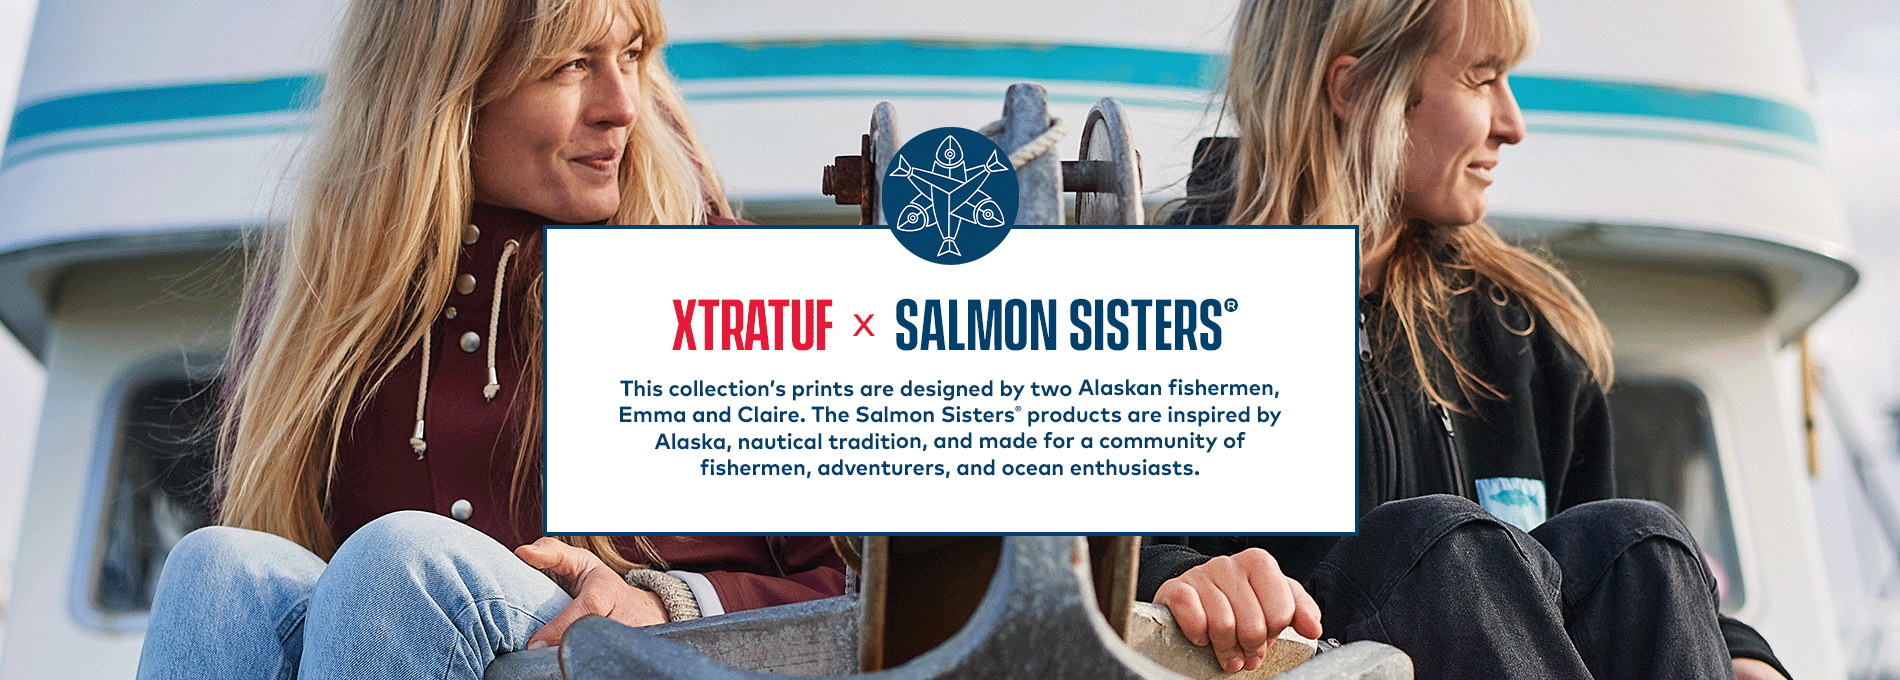 Salmon Sisters x XTRATUF. This collection's prints are designed by two Alaskan fisherman, Emma and Claire. The Salmon Sisters products are inspired by Alaska, nautical tradition, and made for a community of fisherman, adventurers, and ocean enthusiasts.